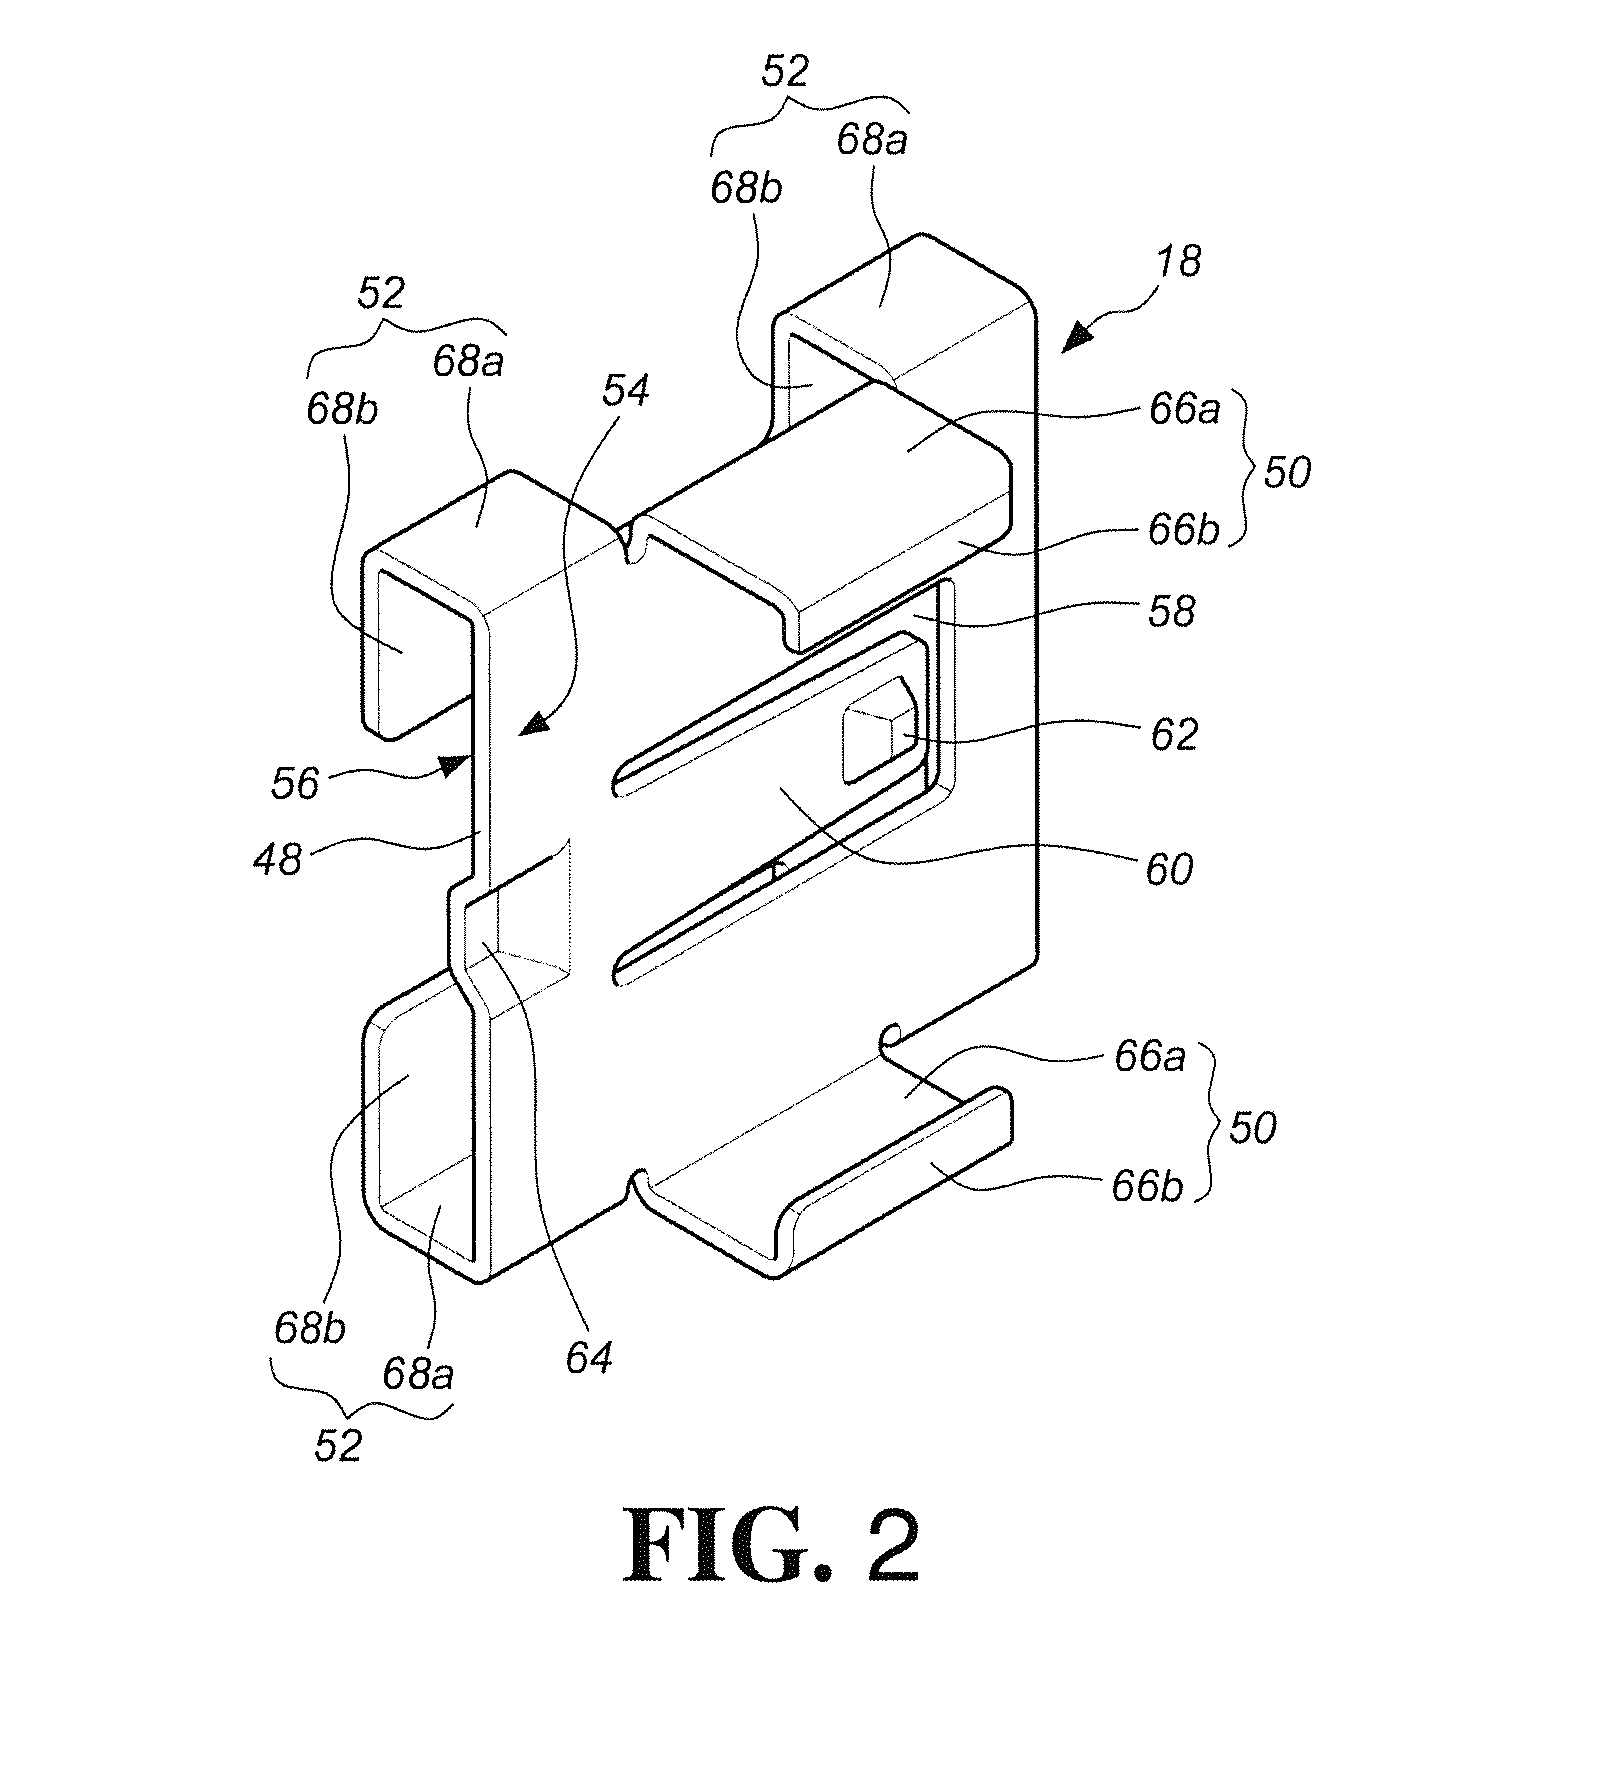 Slide rail assembly for use in rack system and reinforcement member thereof